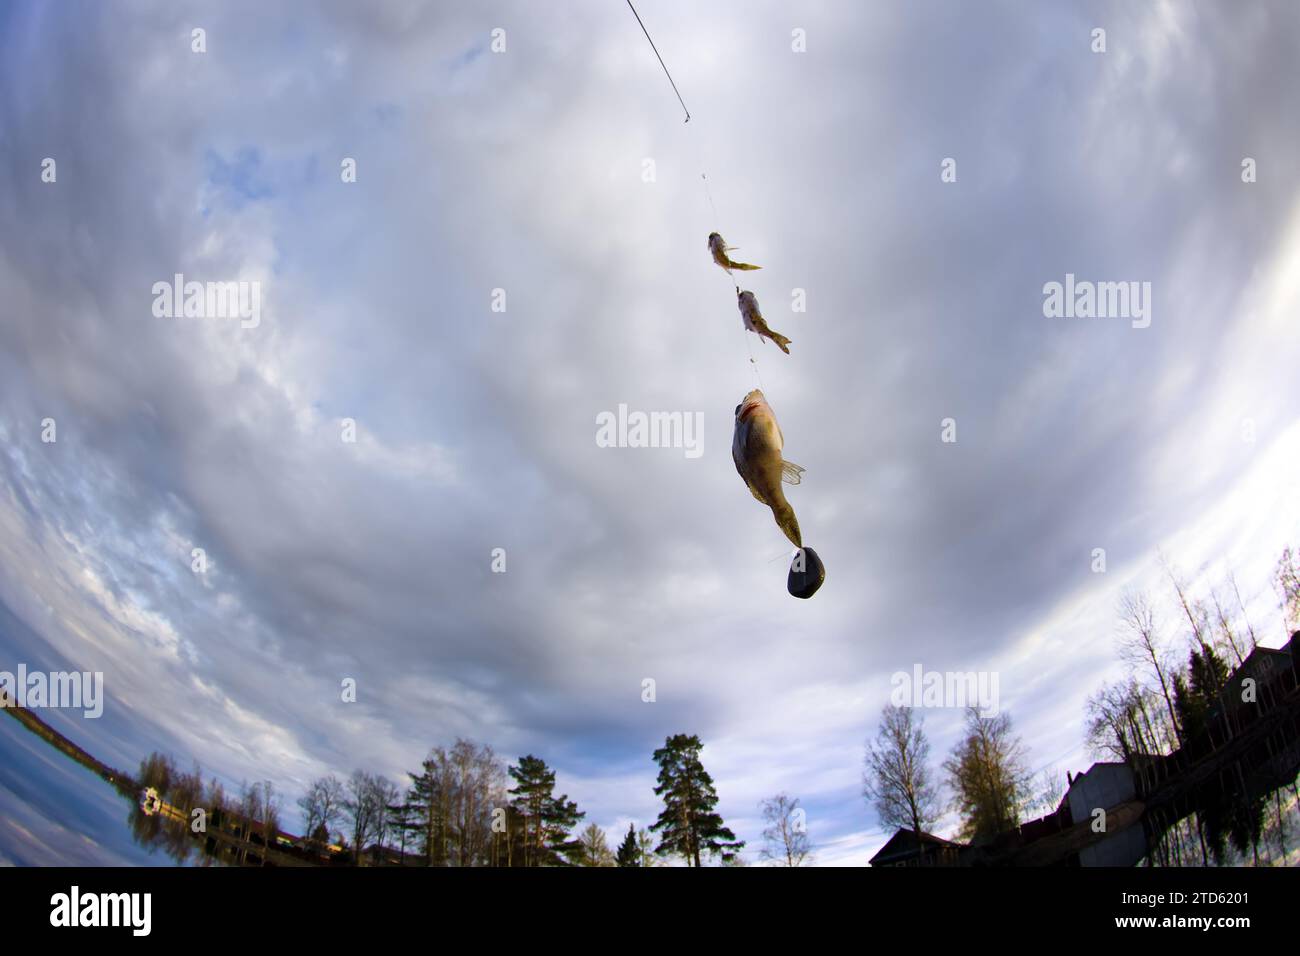 Village fishing - a joyful set. Three ruffs were caught and one ledgering rod. Fish on the background of river and village. Fisheye lens Stock Photo